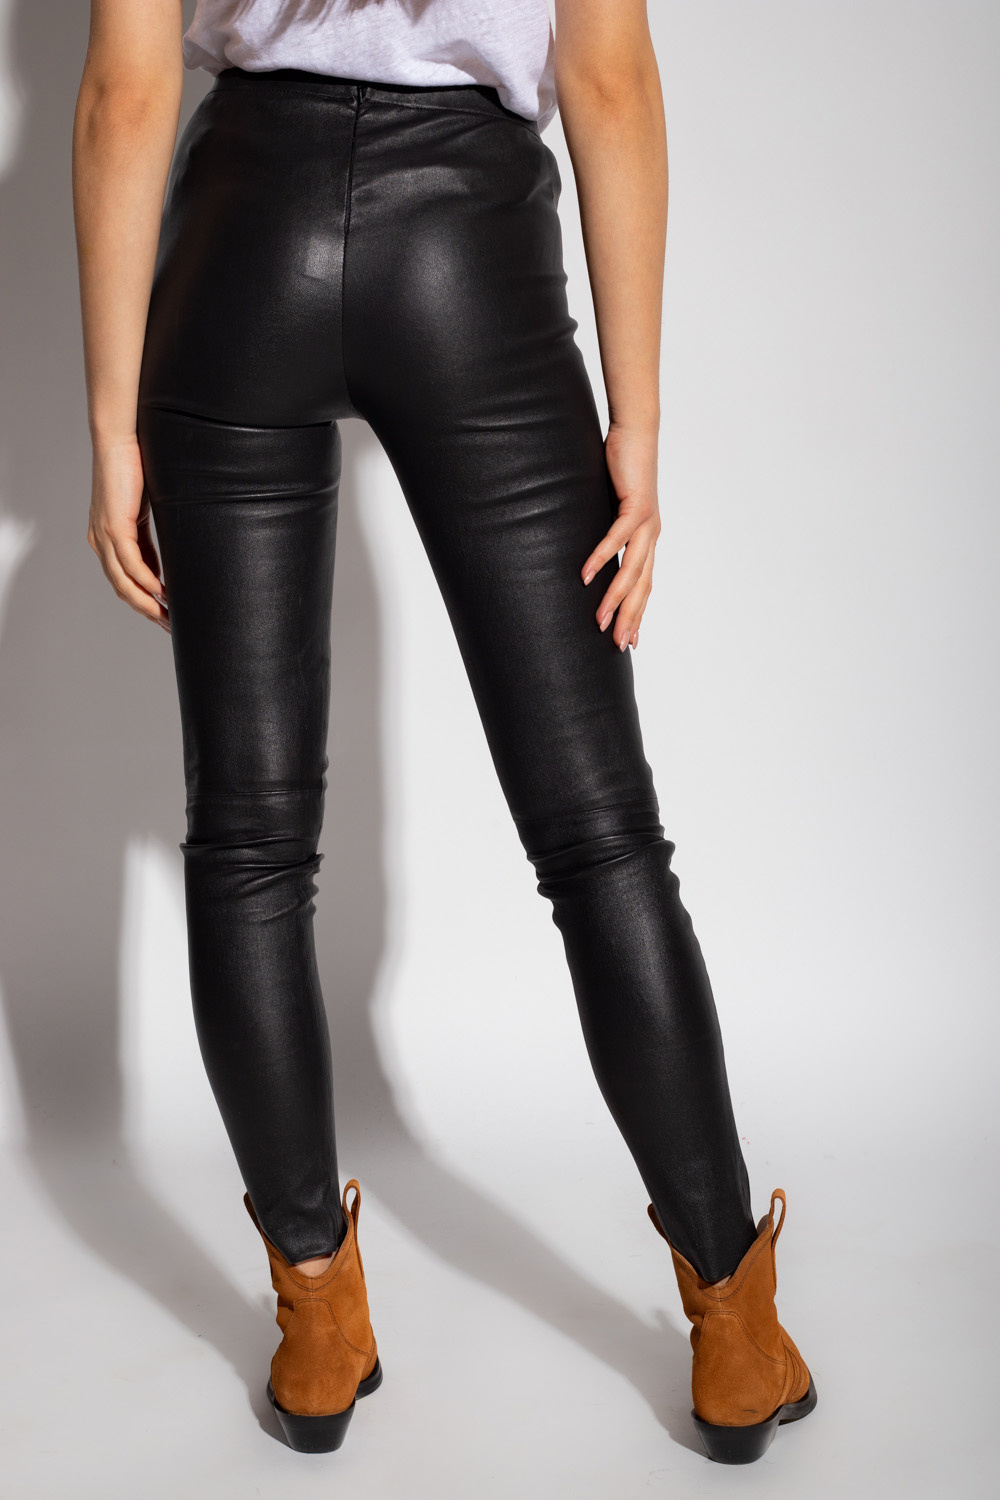 teamed a slick bodysuit with logo-coated pants and a buzzy set of sneakers Leather leggings